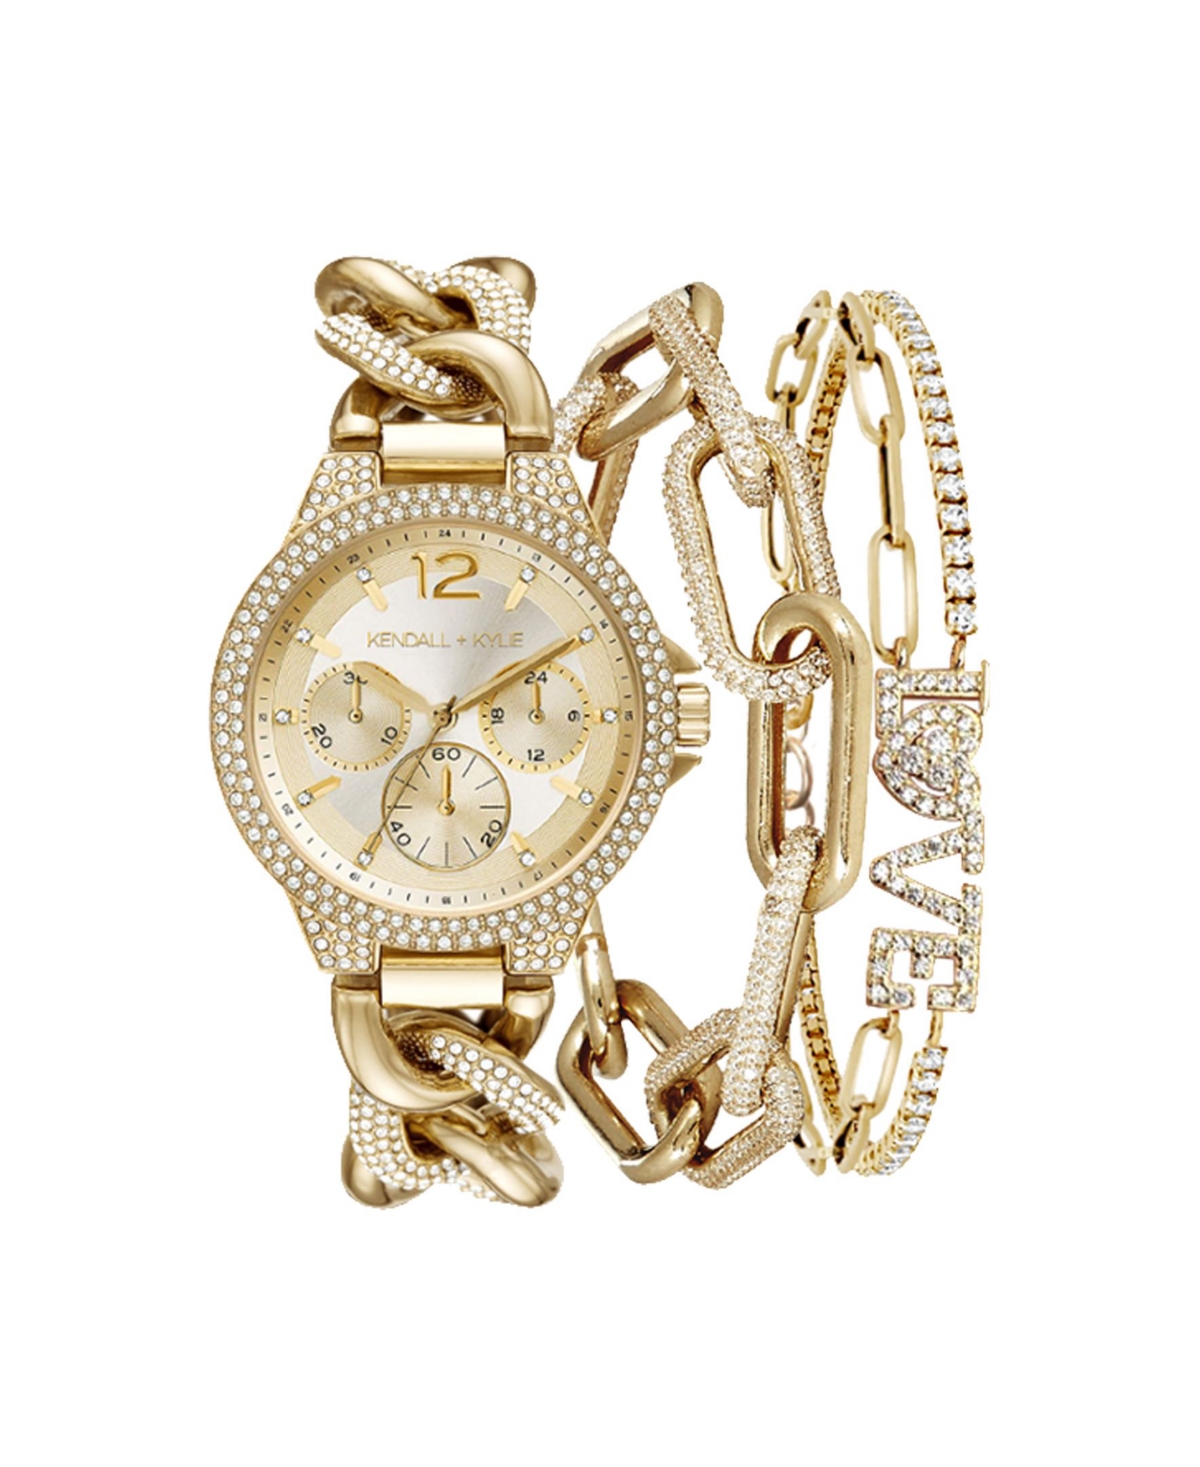 iTouch Women's Kendall + Kylie Gold-Tone Metal Bracelet Watch - Gold-Tone